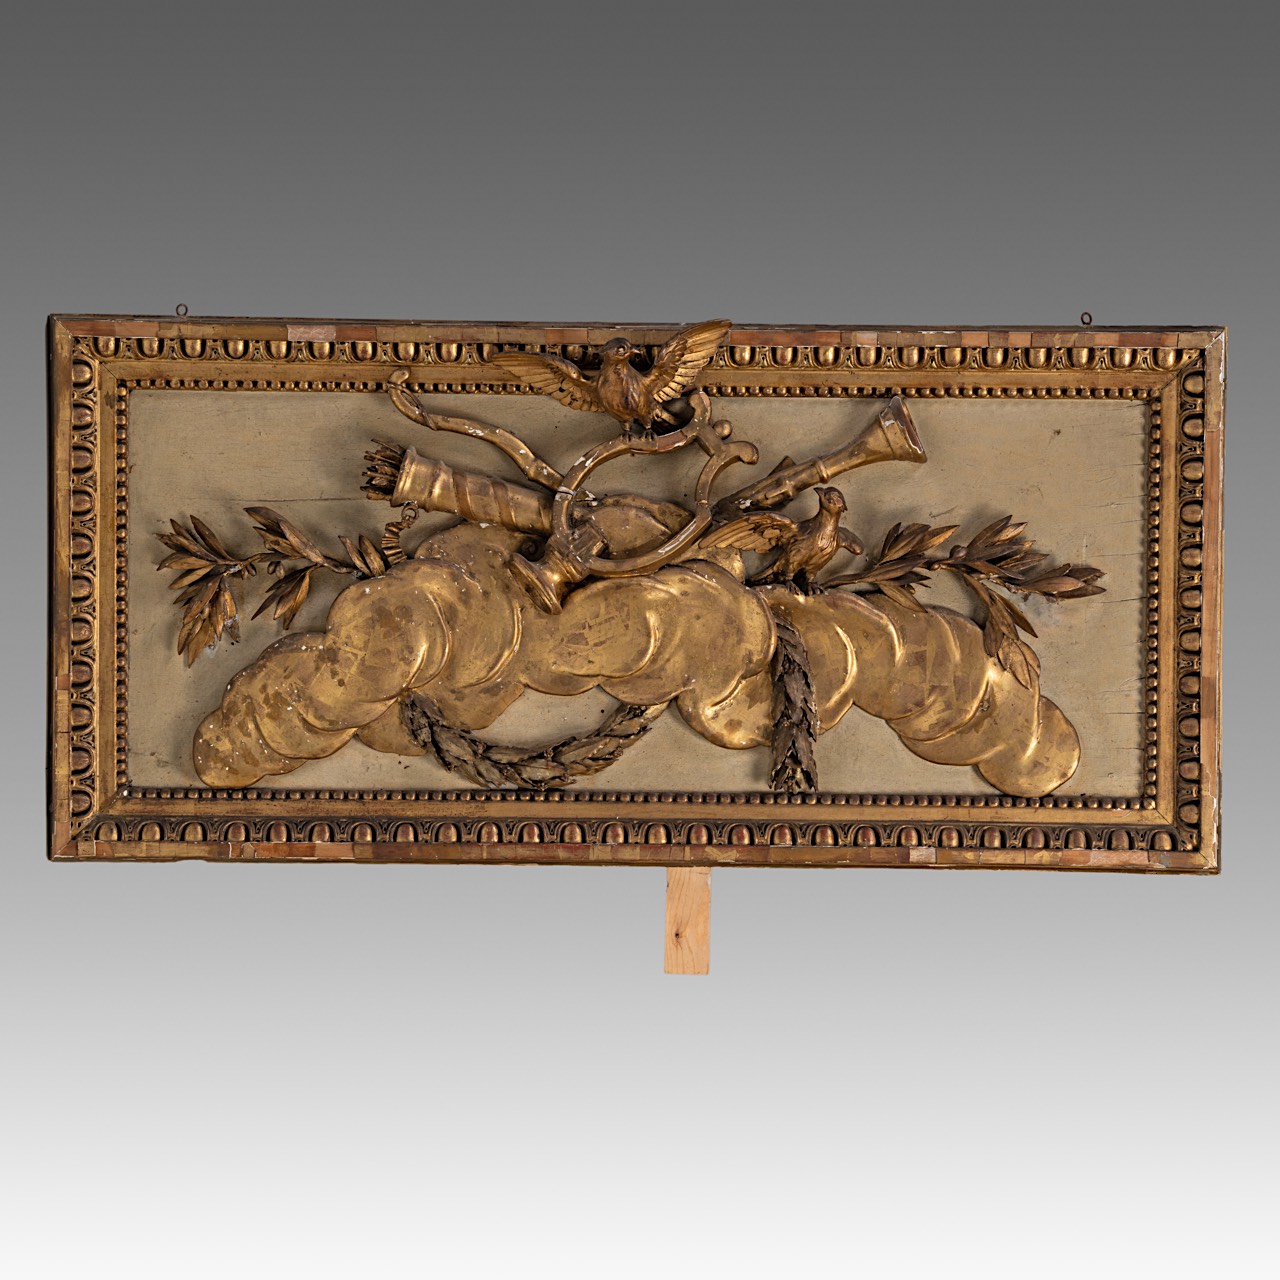 A Louis XVI giltwood trumeau mirror, decorated with a trophy on top, H 270 - W 118 cm - Image 4 of 8